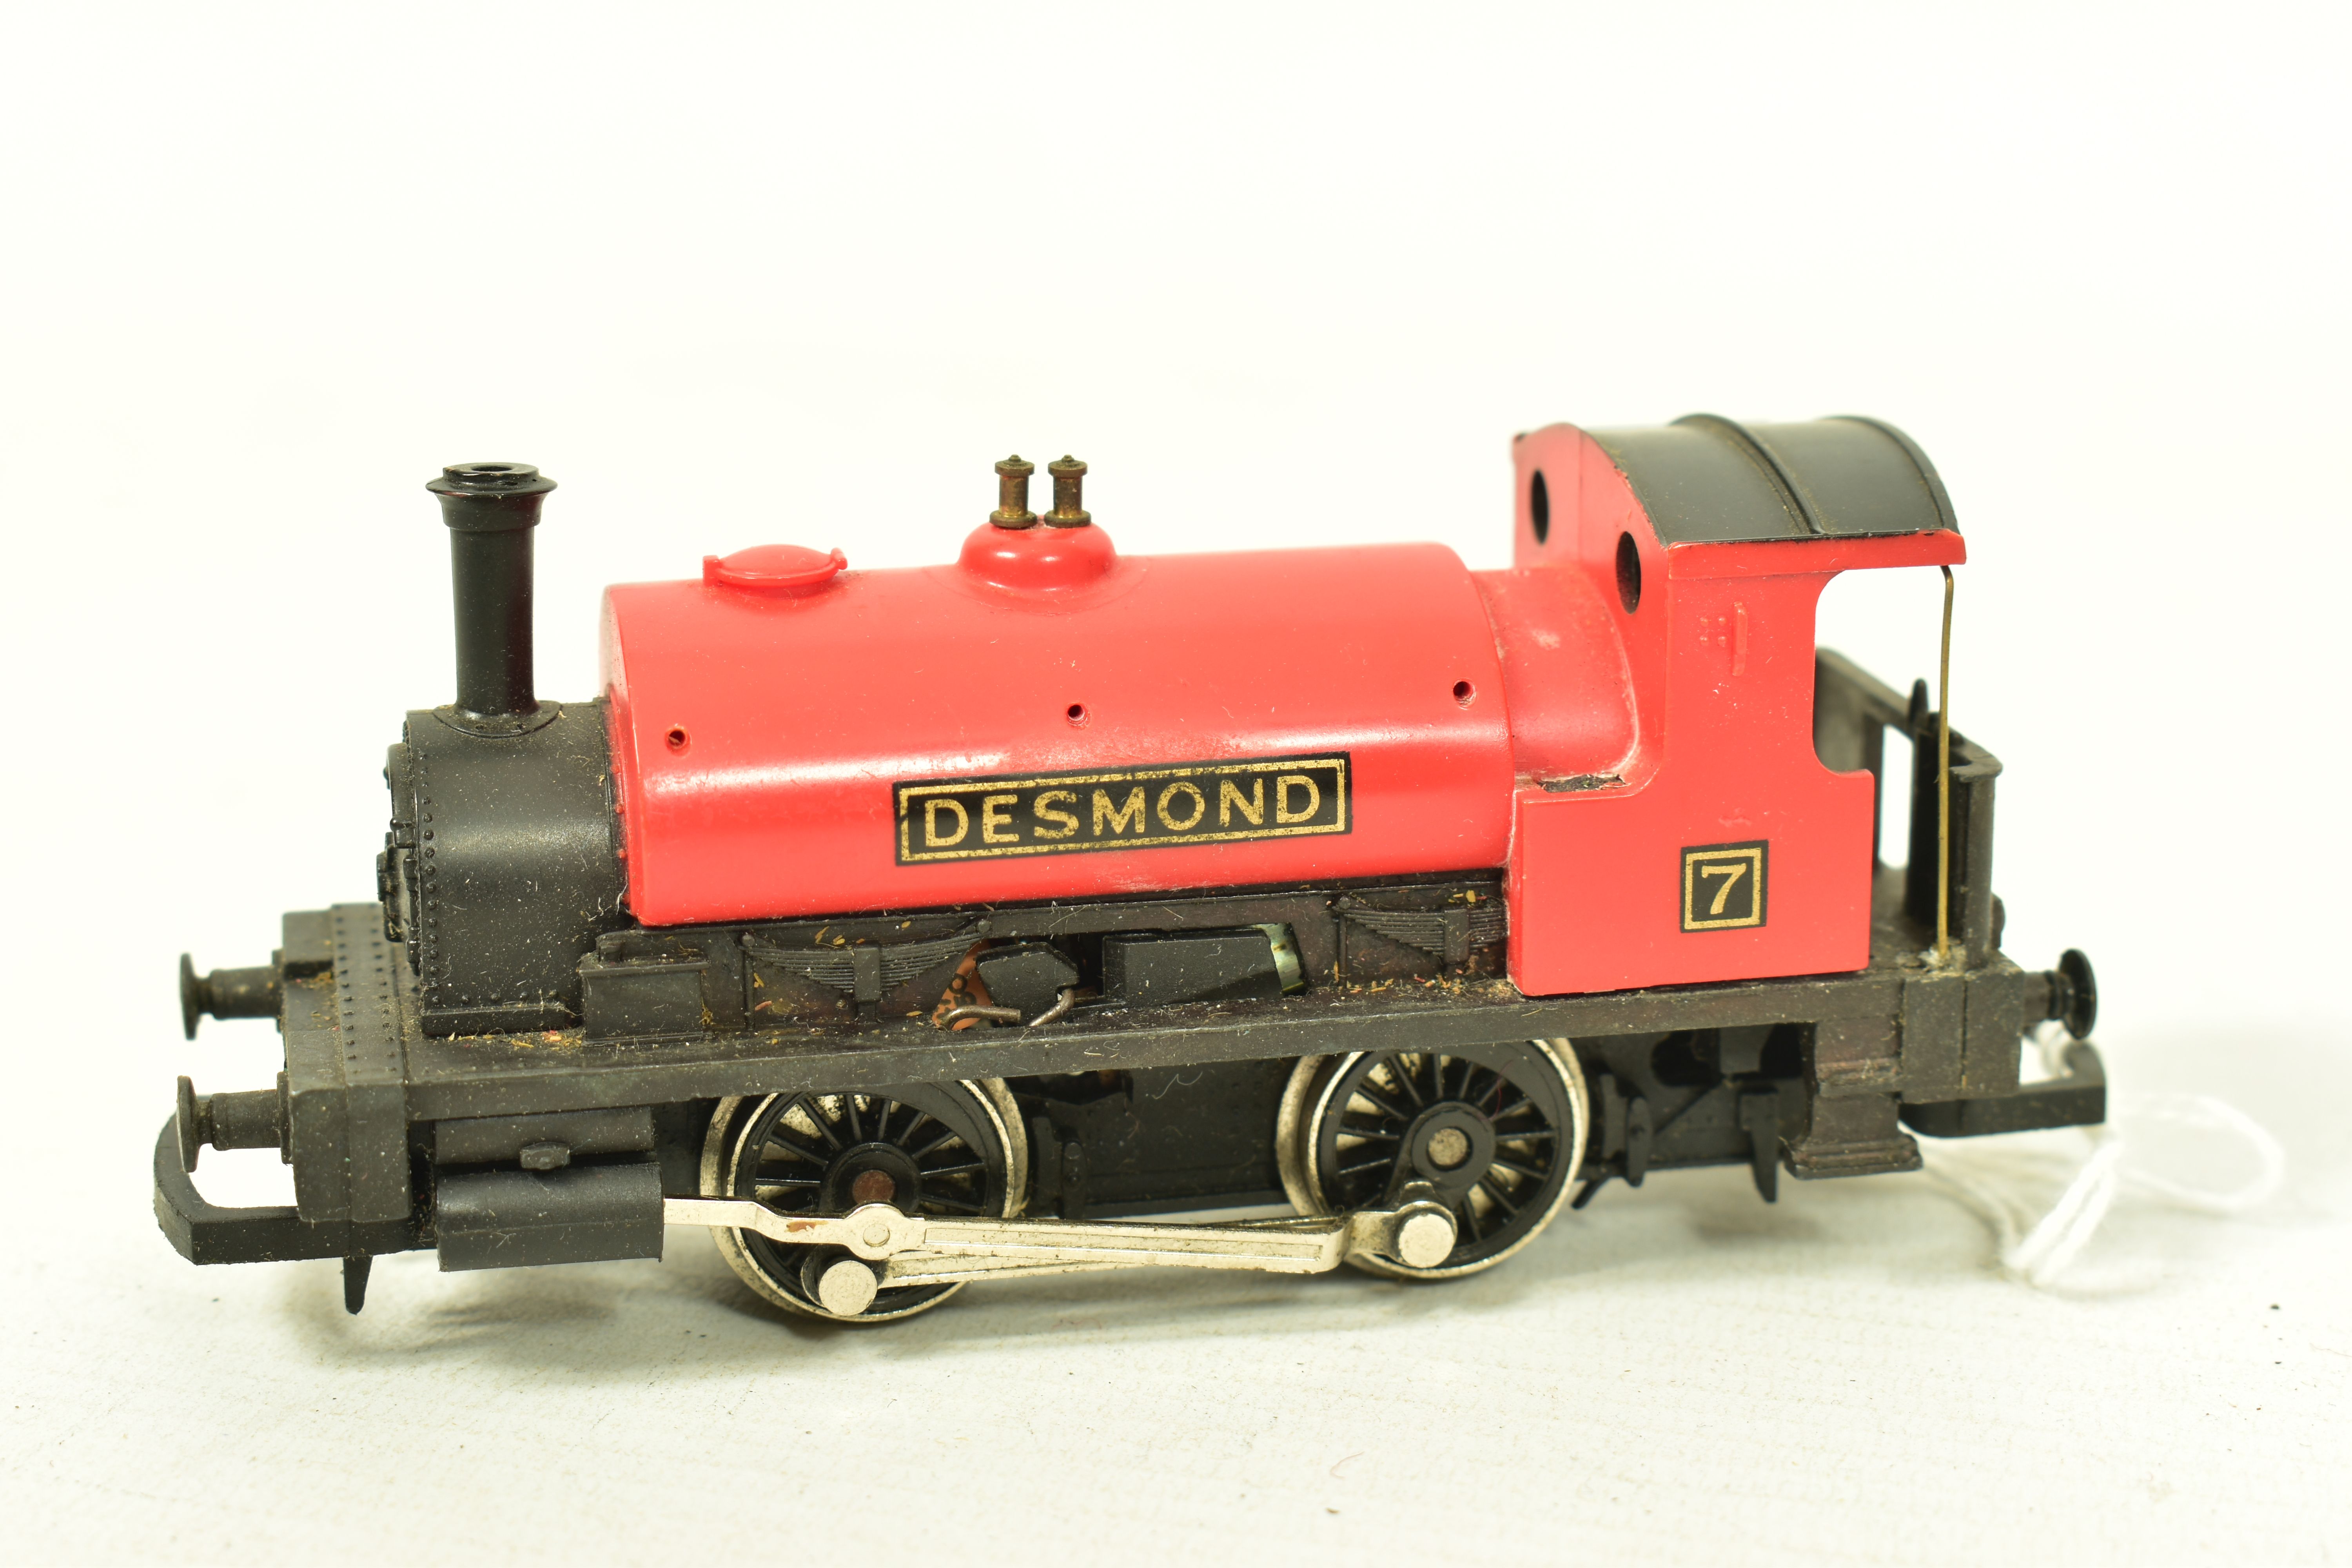 SIX BOXED HORNBY OO GAUGE CLASS 0F PUG SADDLE TANK LOCOMOTIVES, assorted numbers and liveries (R752, - Image 4 of 7